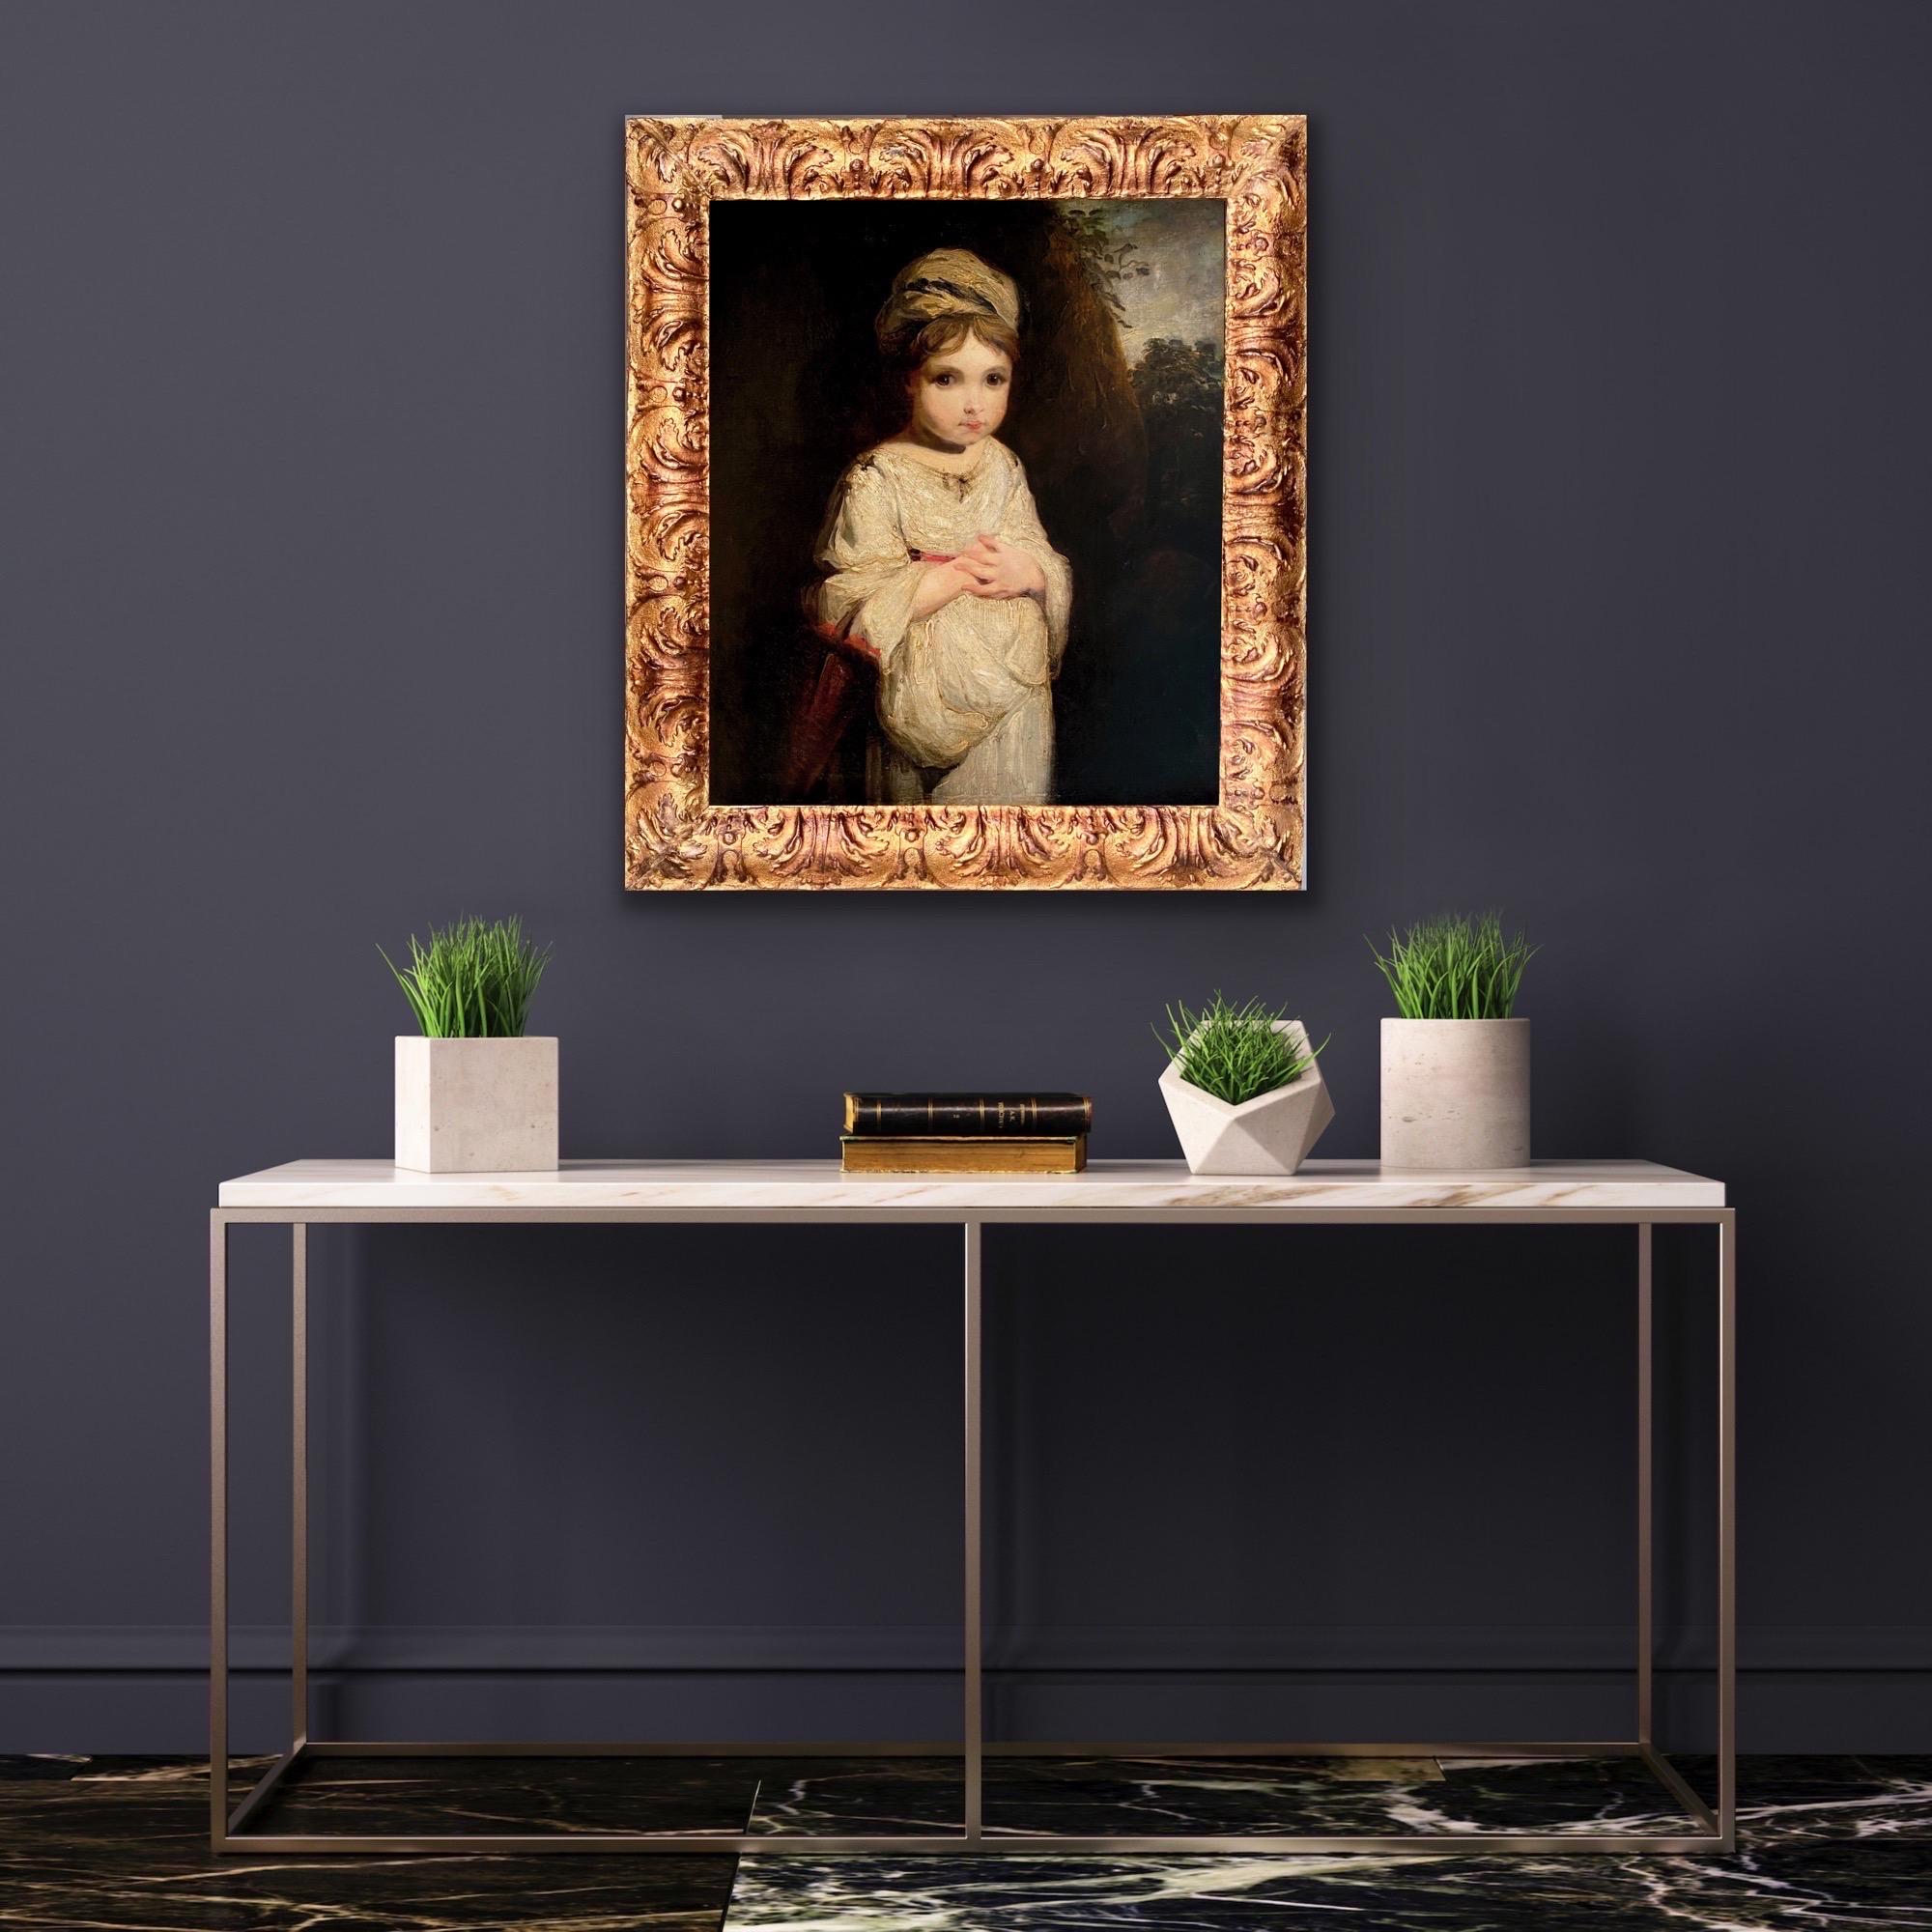 18th century British Old Master painting - The Cherry Girl - Age of innocence  3